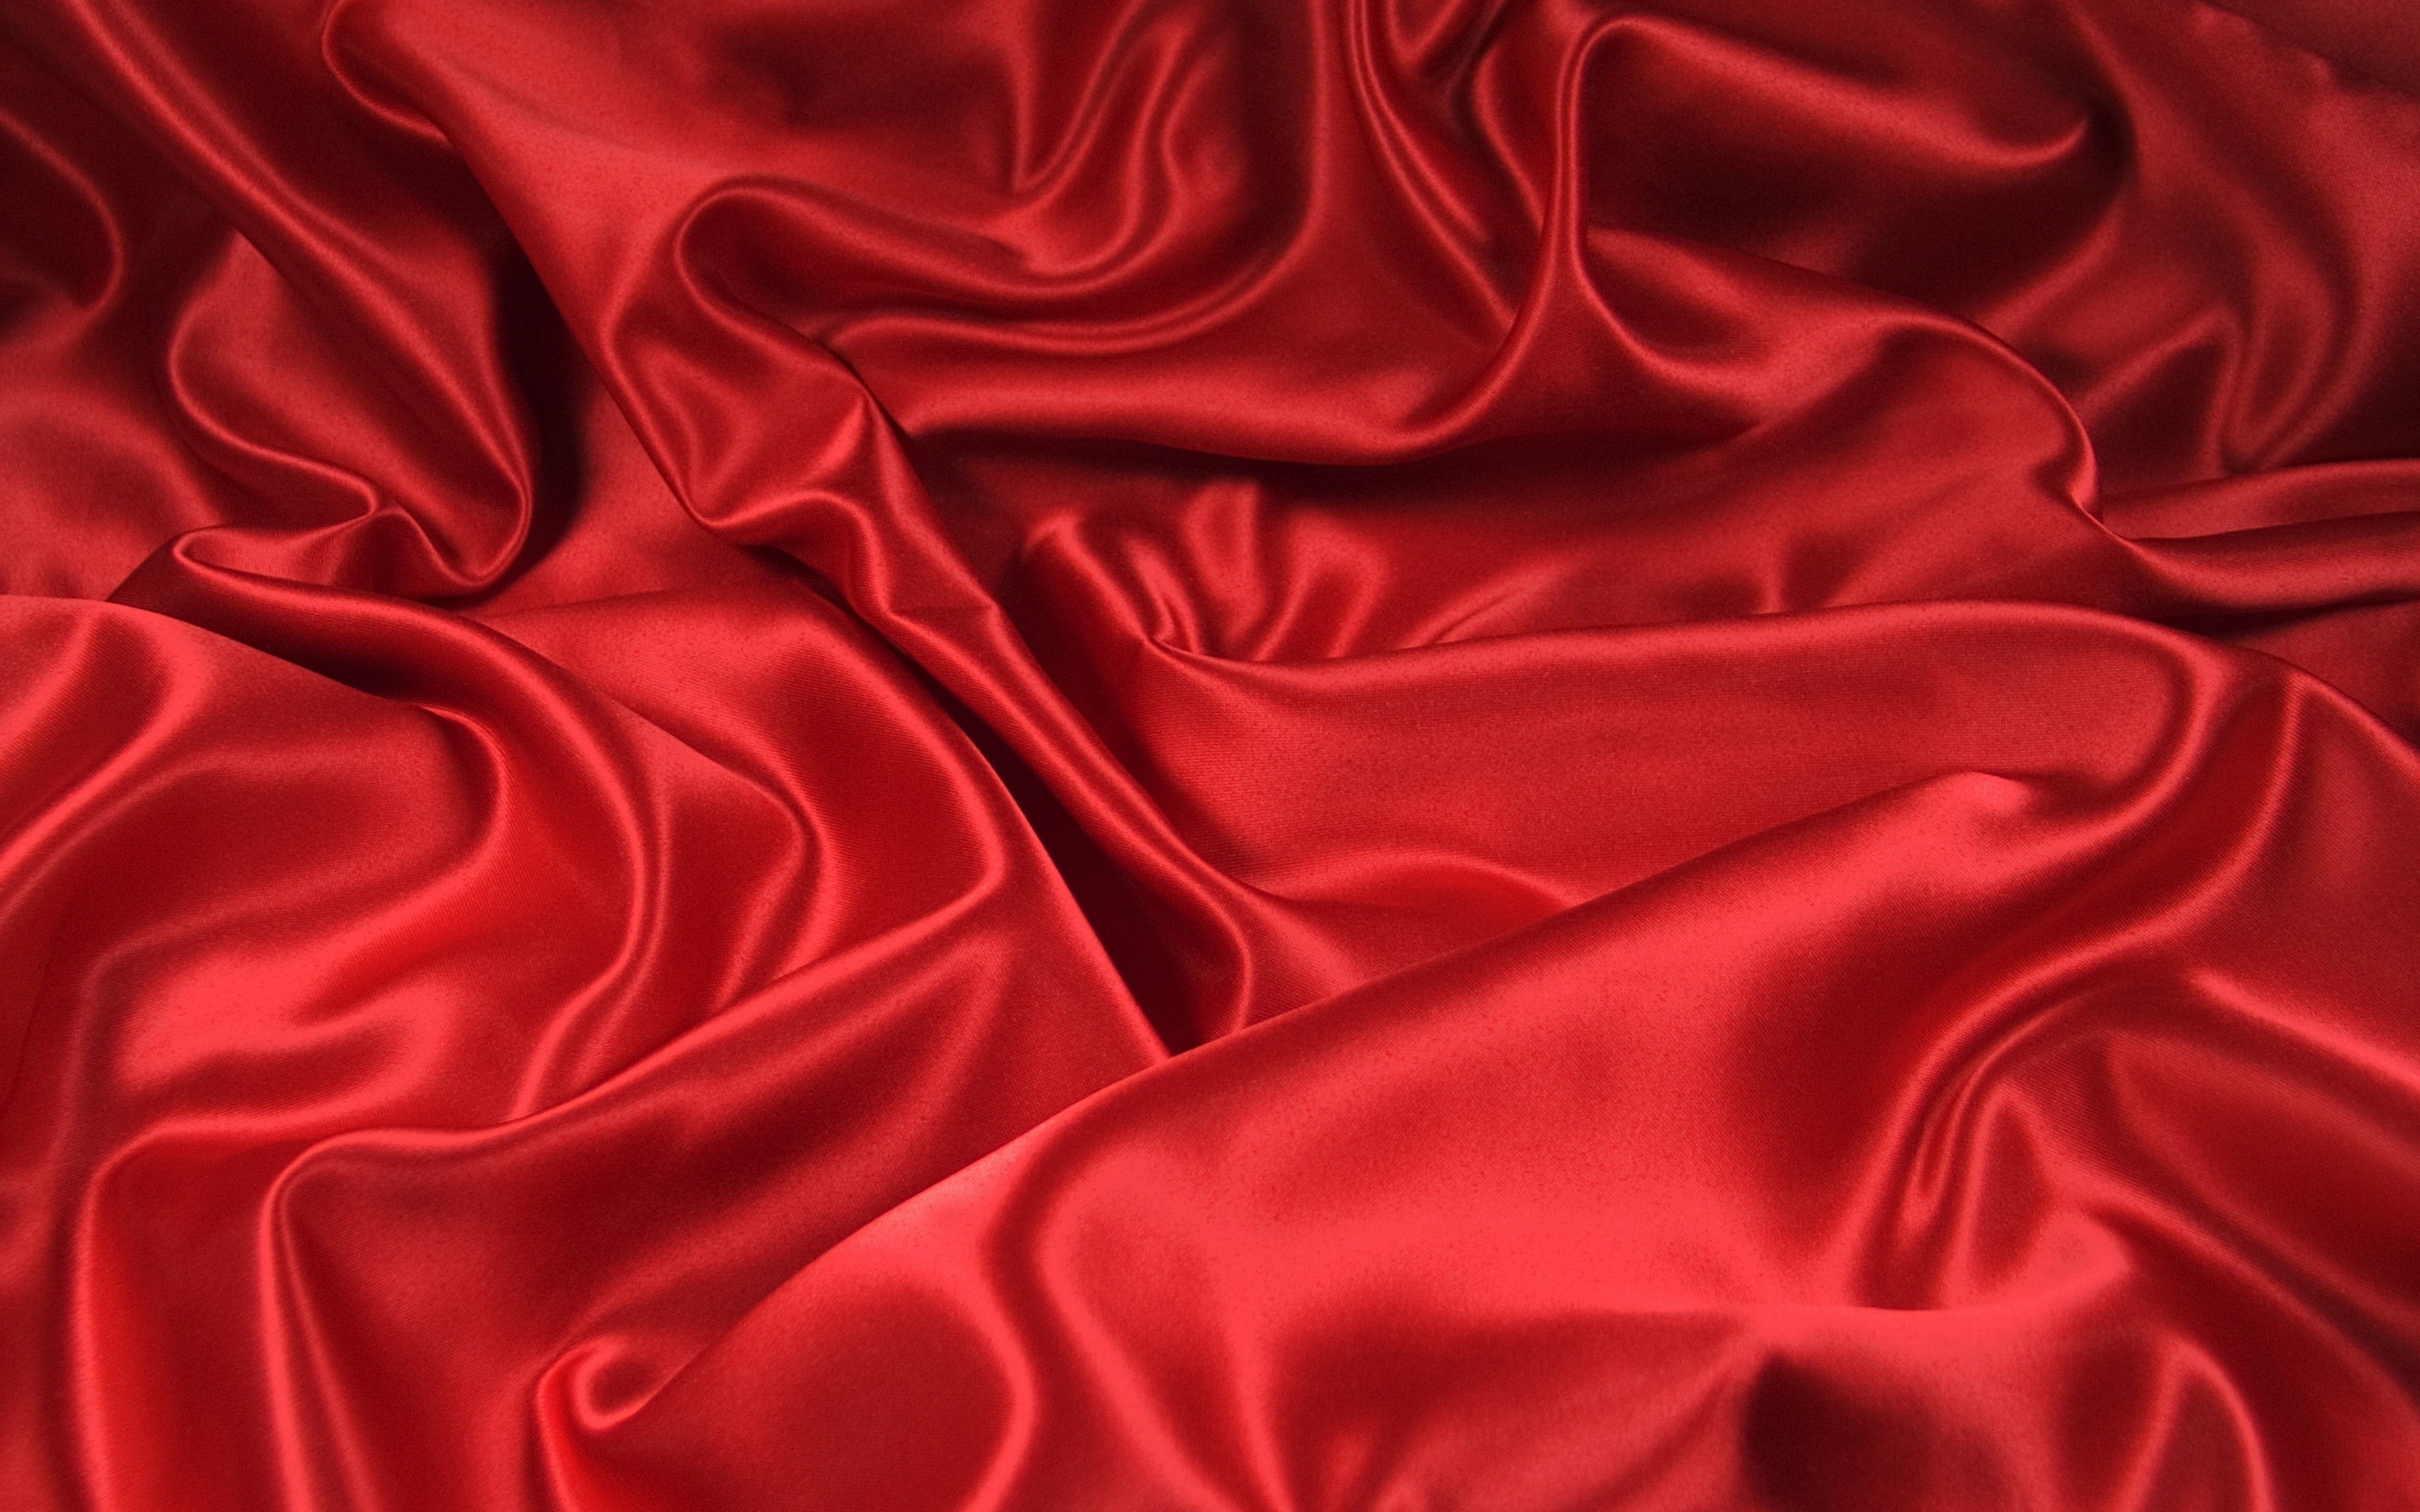 bends, fabric backgrounds, folds, red, download 3840x2400 bends